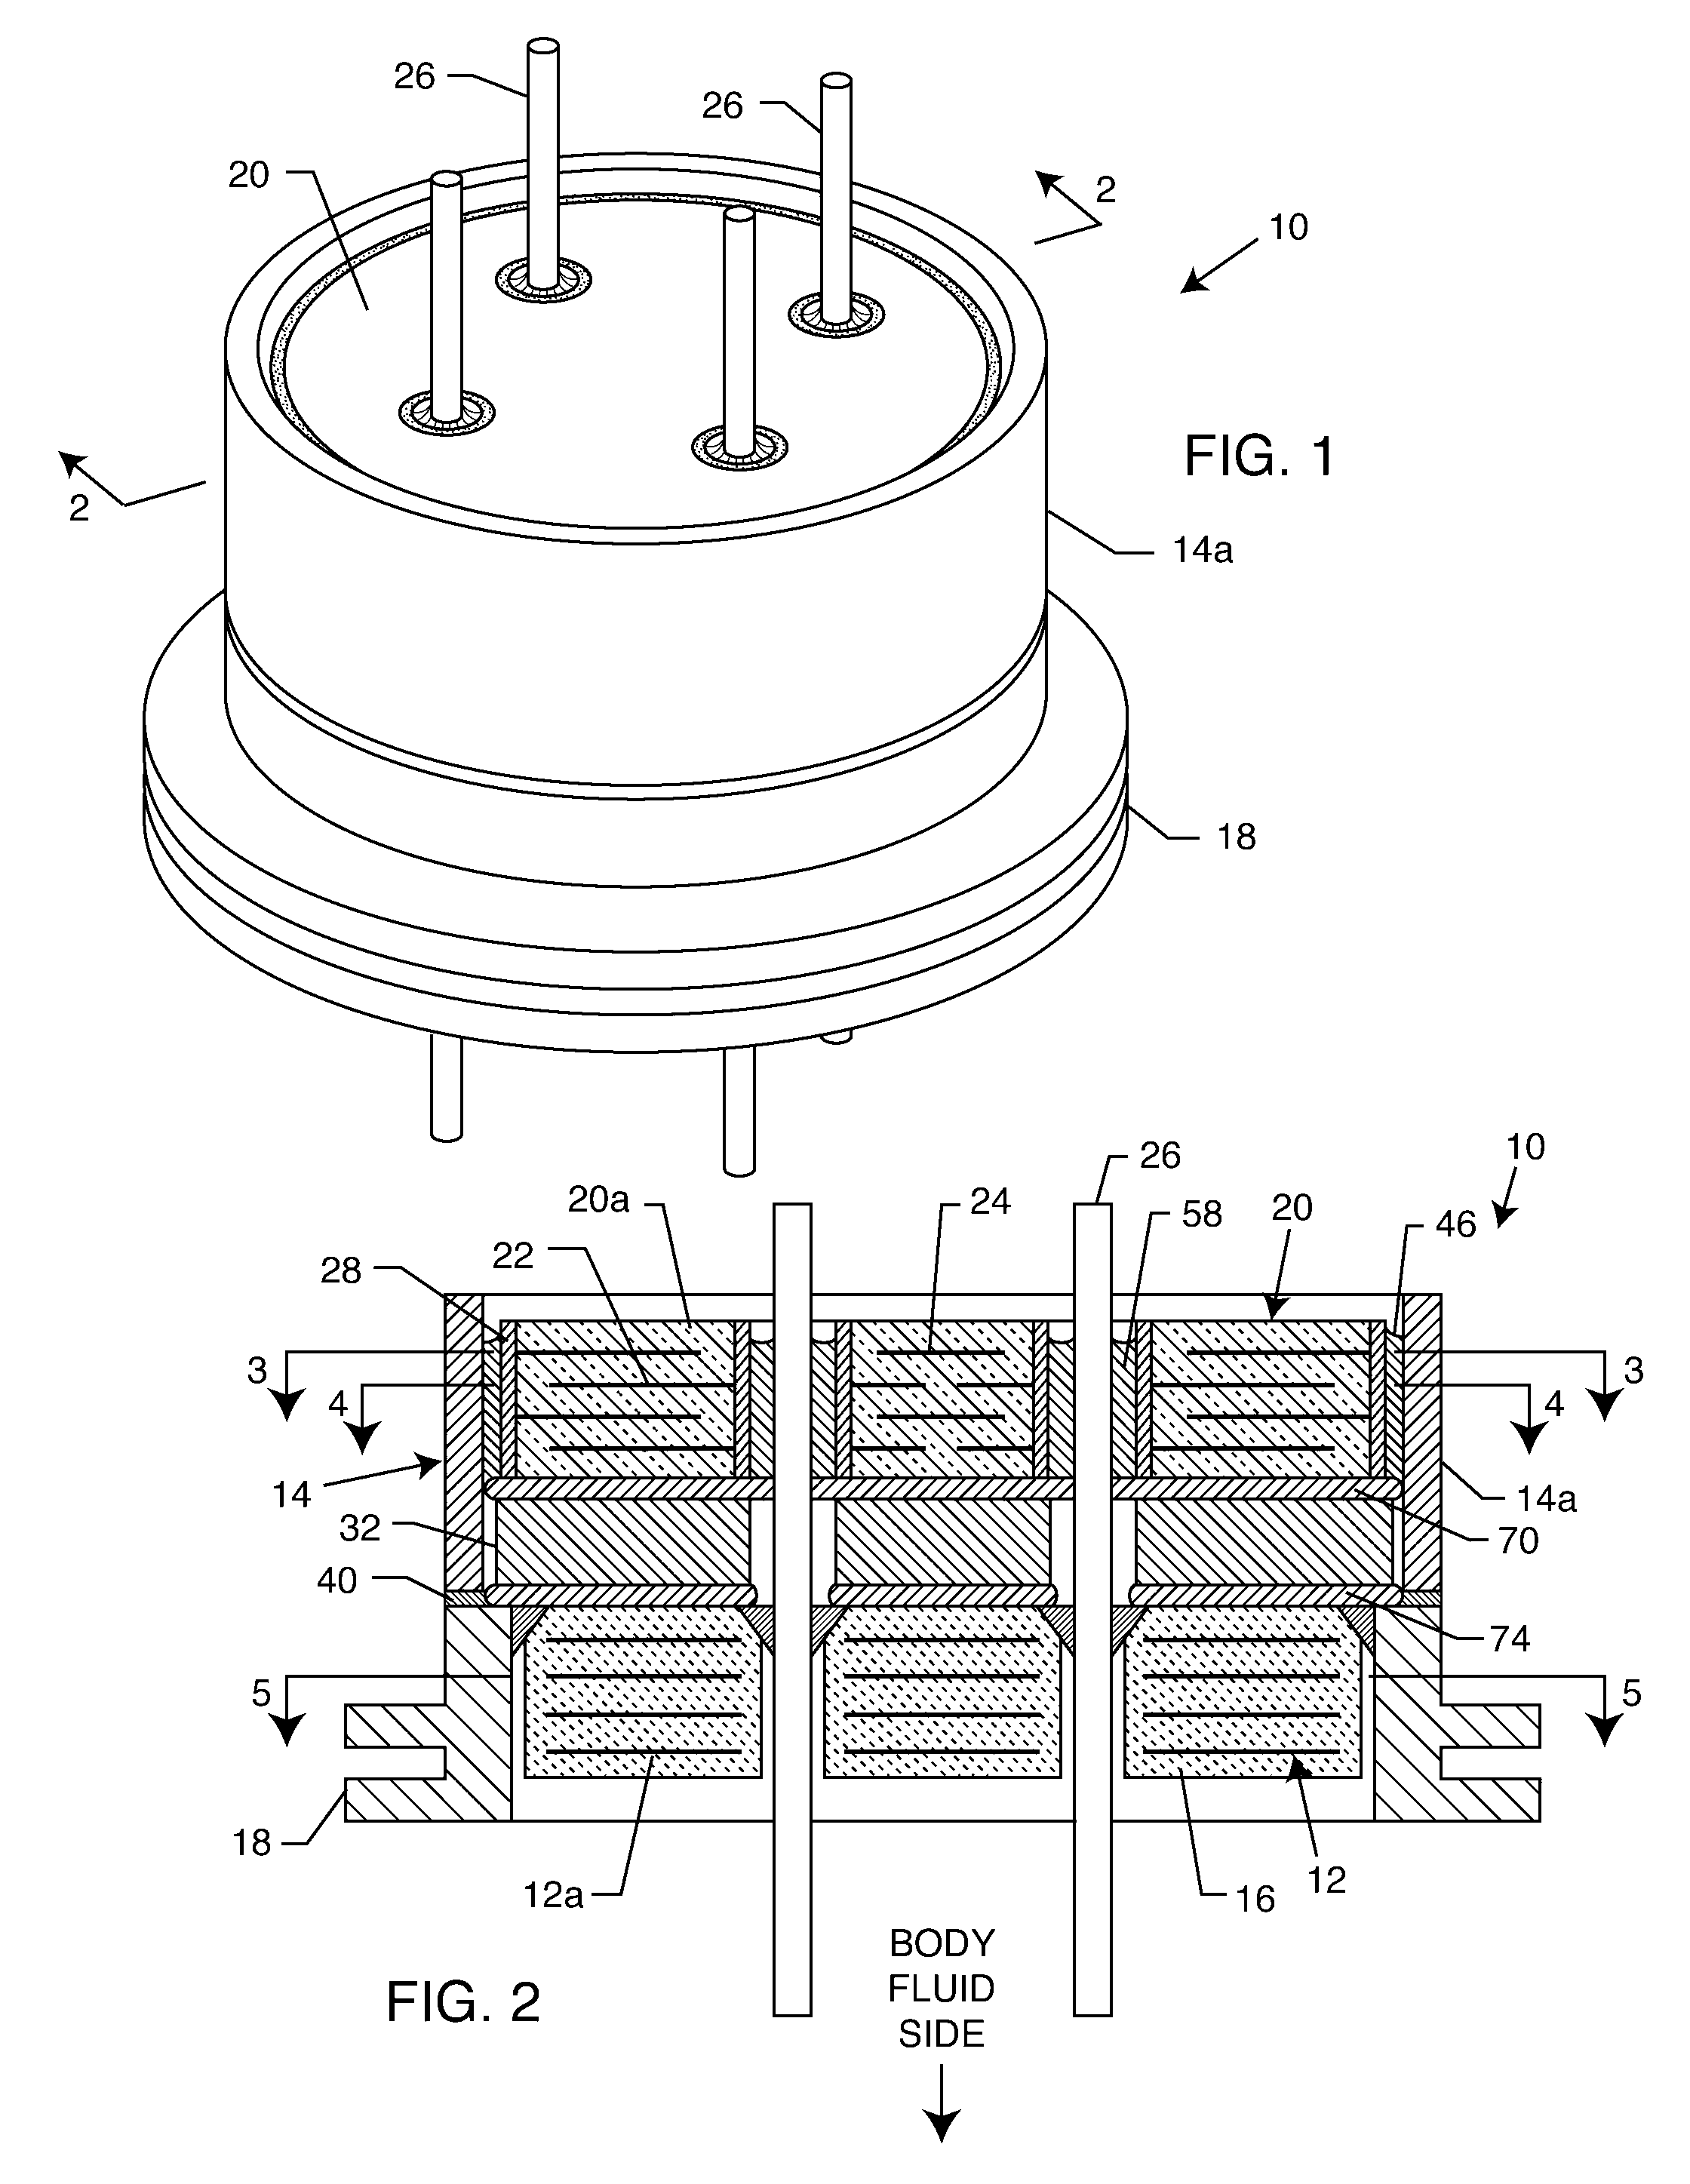 Apparatus and process for reducing the susceptibility of active implantable medical devices to medical procedures such as magnetic resonance imaging